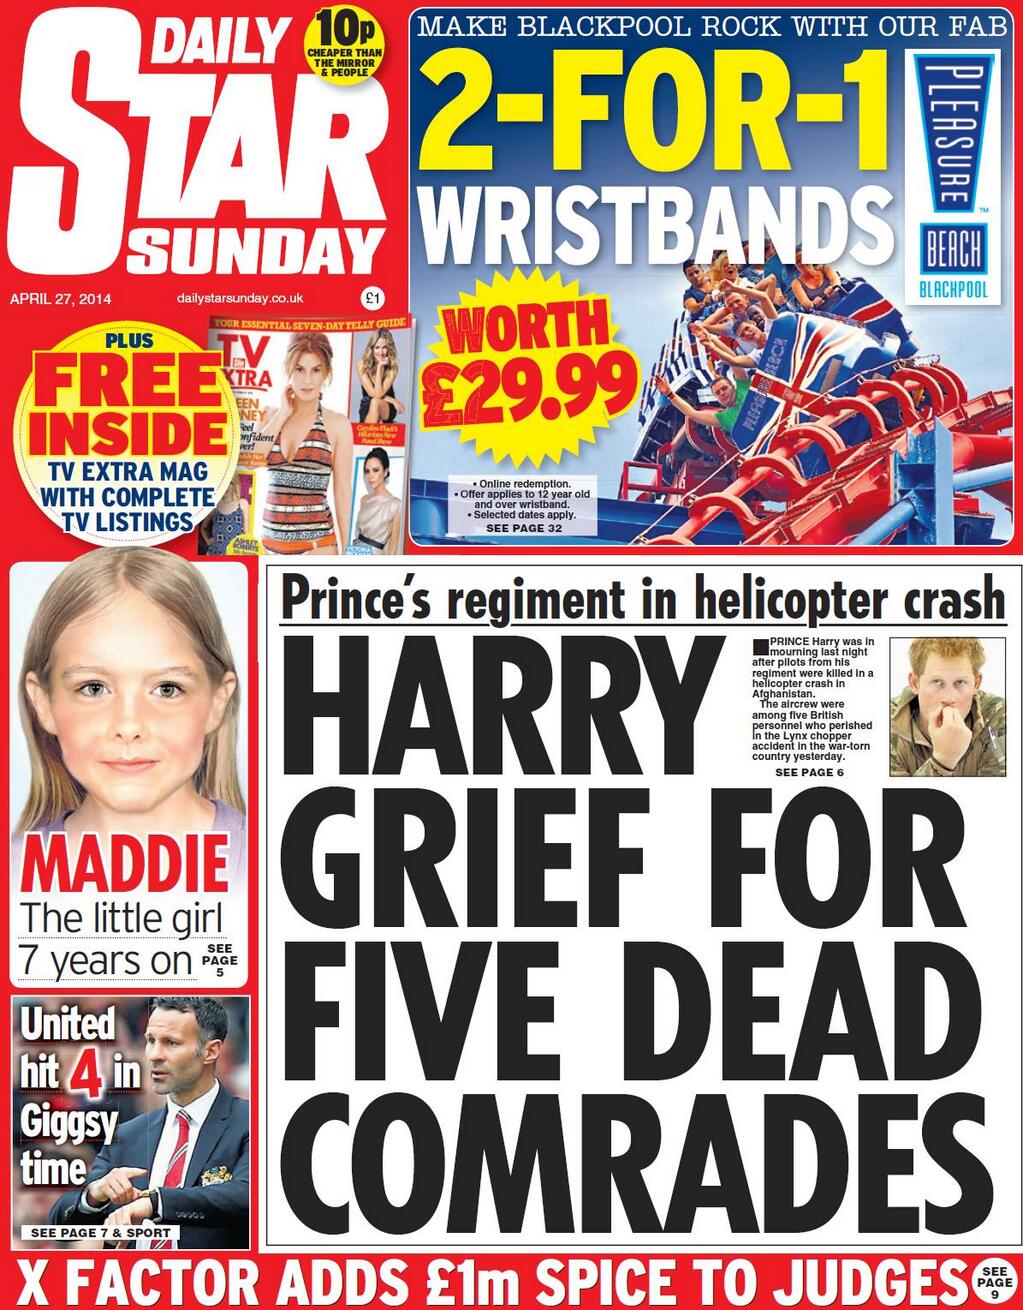 Daily Star Front Page 5th of October 2020 - Tomorrows 